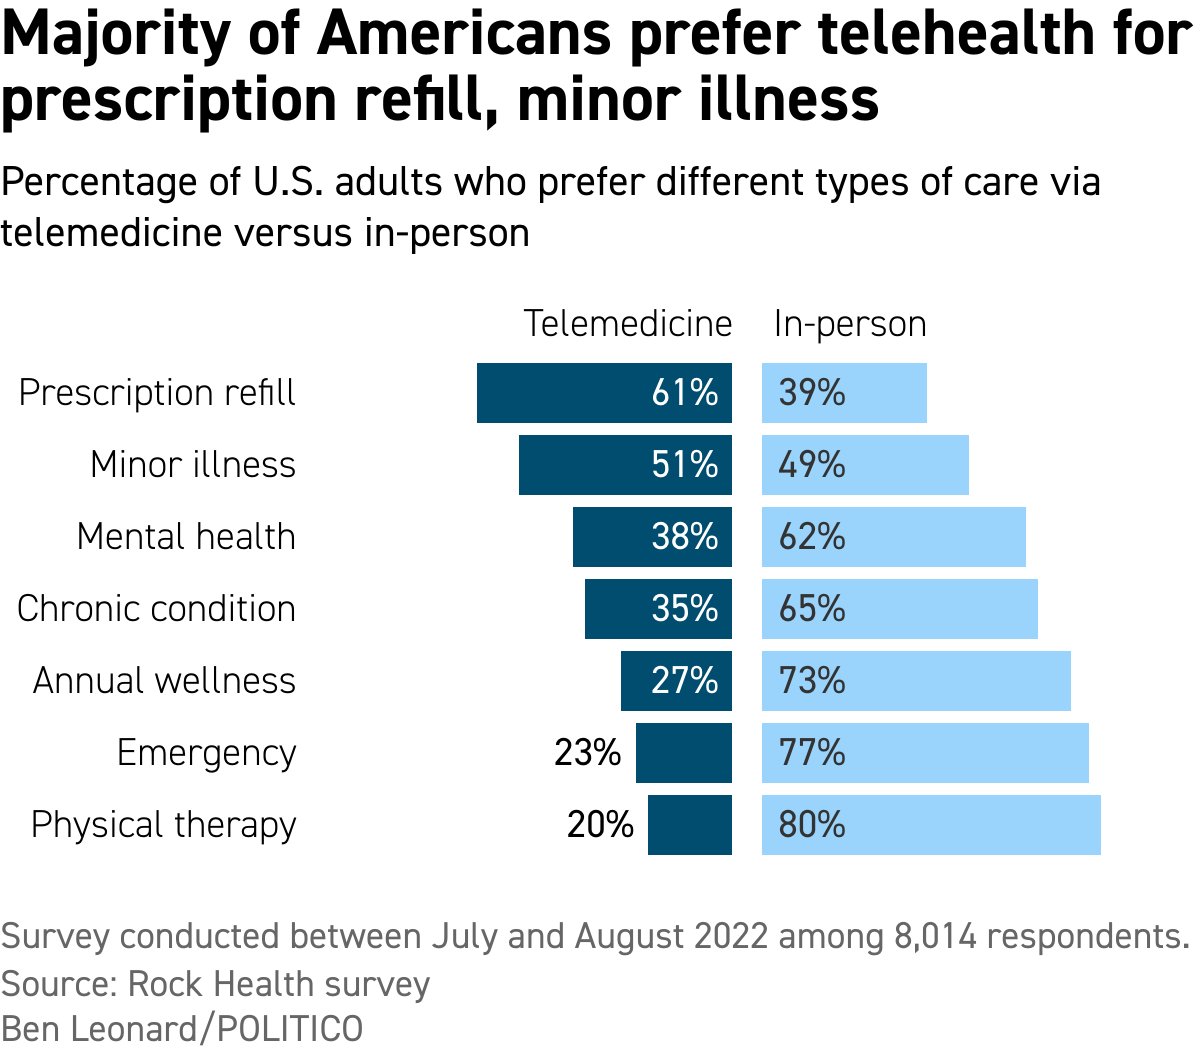 'Few Americans used #telehealth before #Covid_19. As telehealth took root as a #pandemic precaution, #patients were skeptical of its quality compared with in-person care. That’s changing.' politico.com/newsletters/fu…